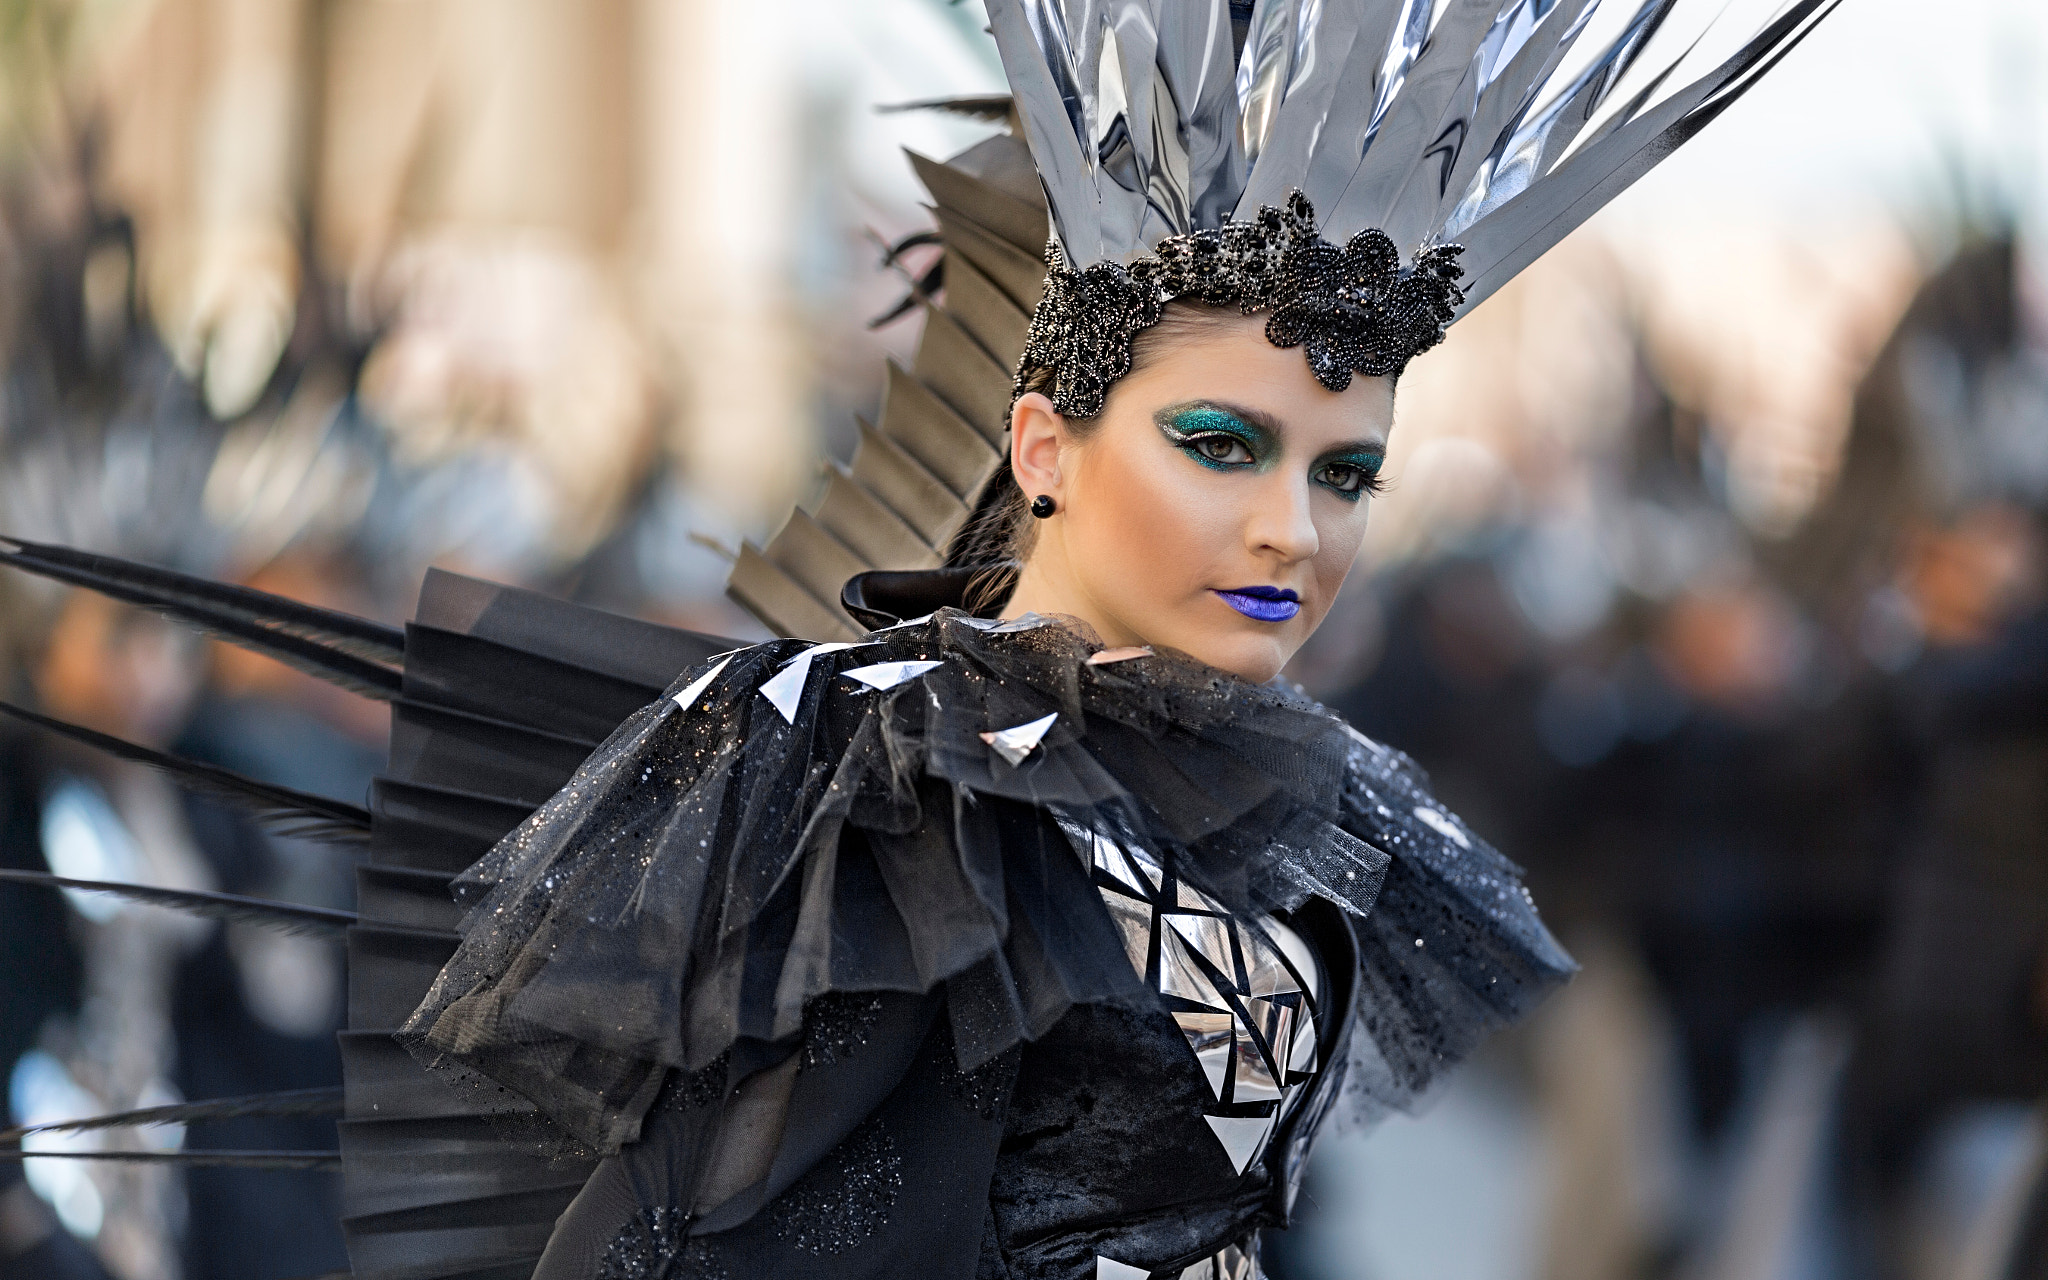 Vicente Concha Women Feathers Black Clothing Makeup Looking Away Glamour Glitter Depth Of Field Carn 2048x1280